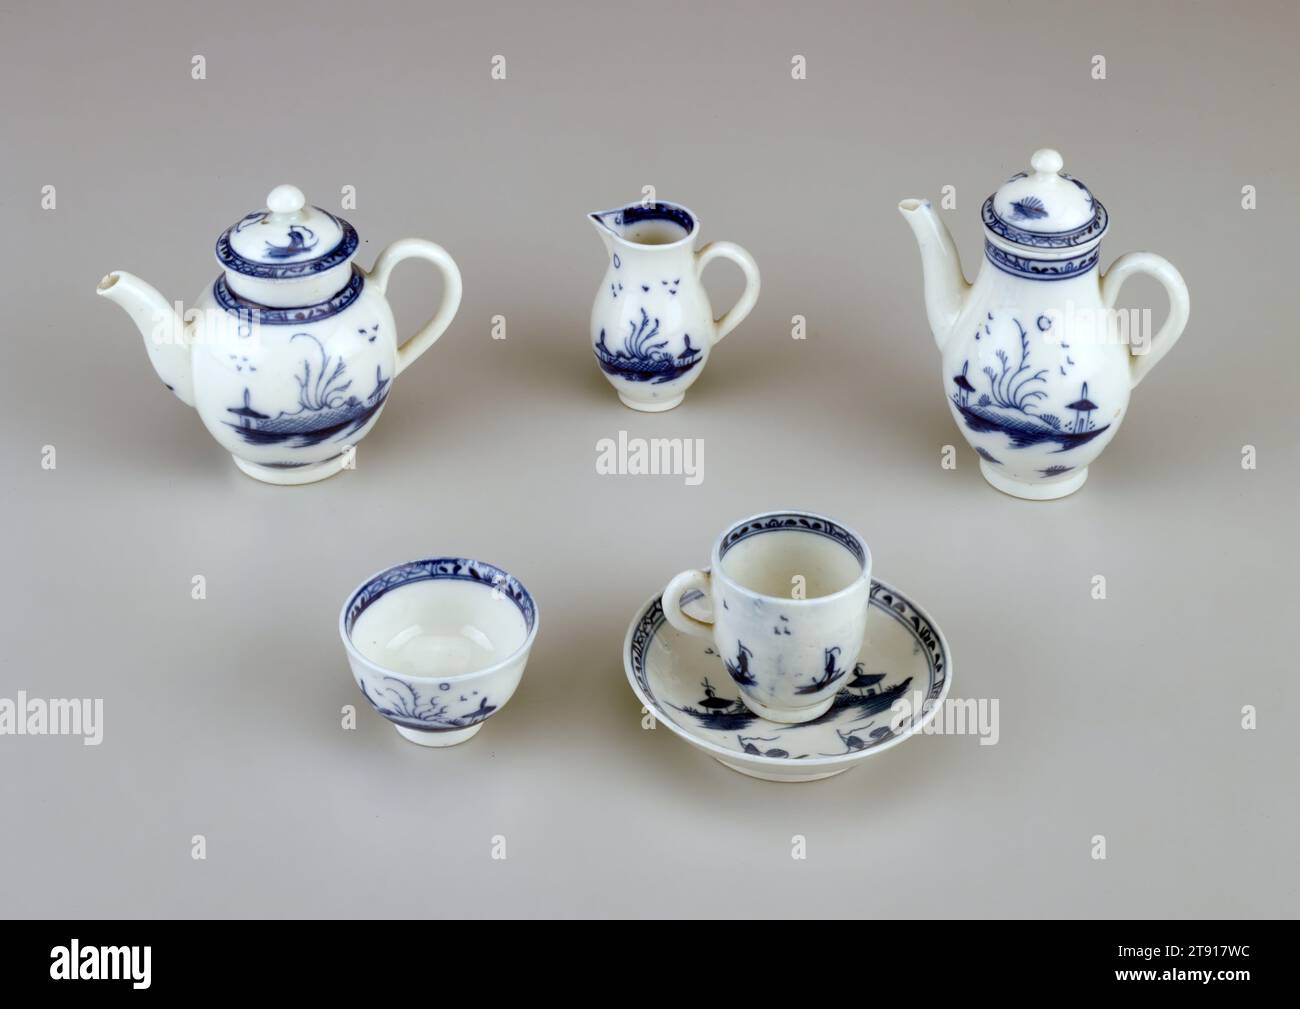 Tea bowl, from a child's tea set, in blue and white, c. 1780-1790, Caughley (Salopian) Works, 1 1/16 x 1 3/4 in. (2.7 x 4.45 cm), Pottery, England, 18th century Stock Photo